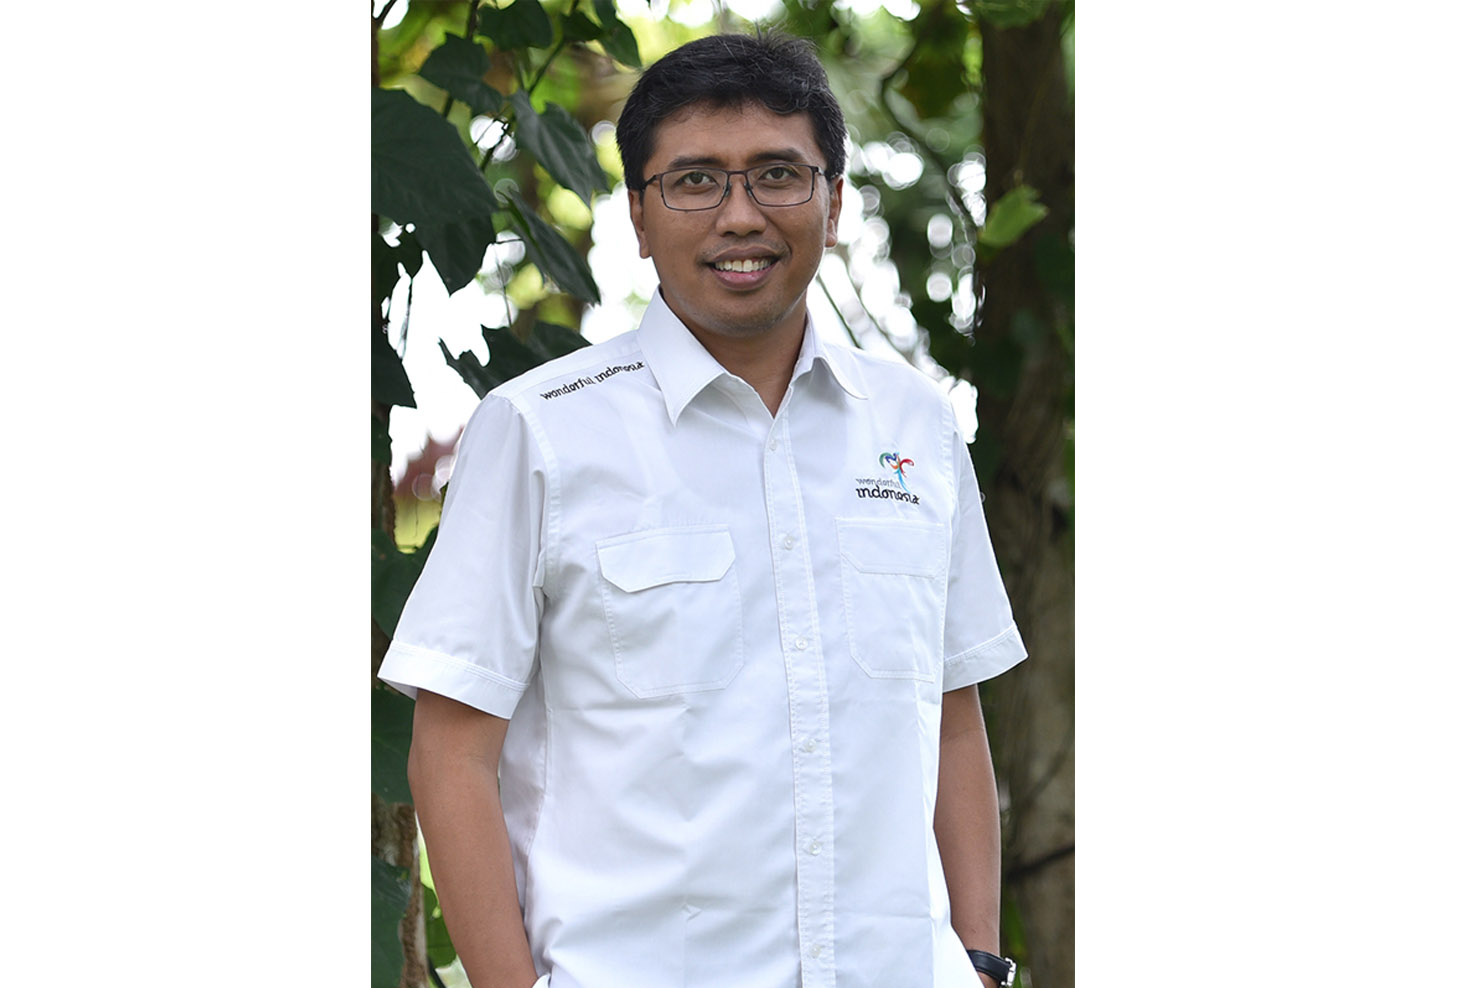 A man with glasses wearing a white shirt with wonderful Indonesia logo on the chest